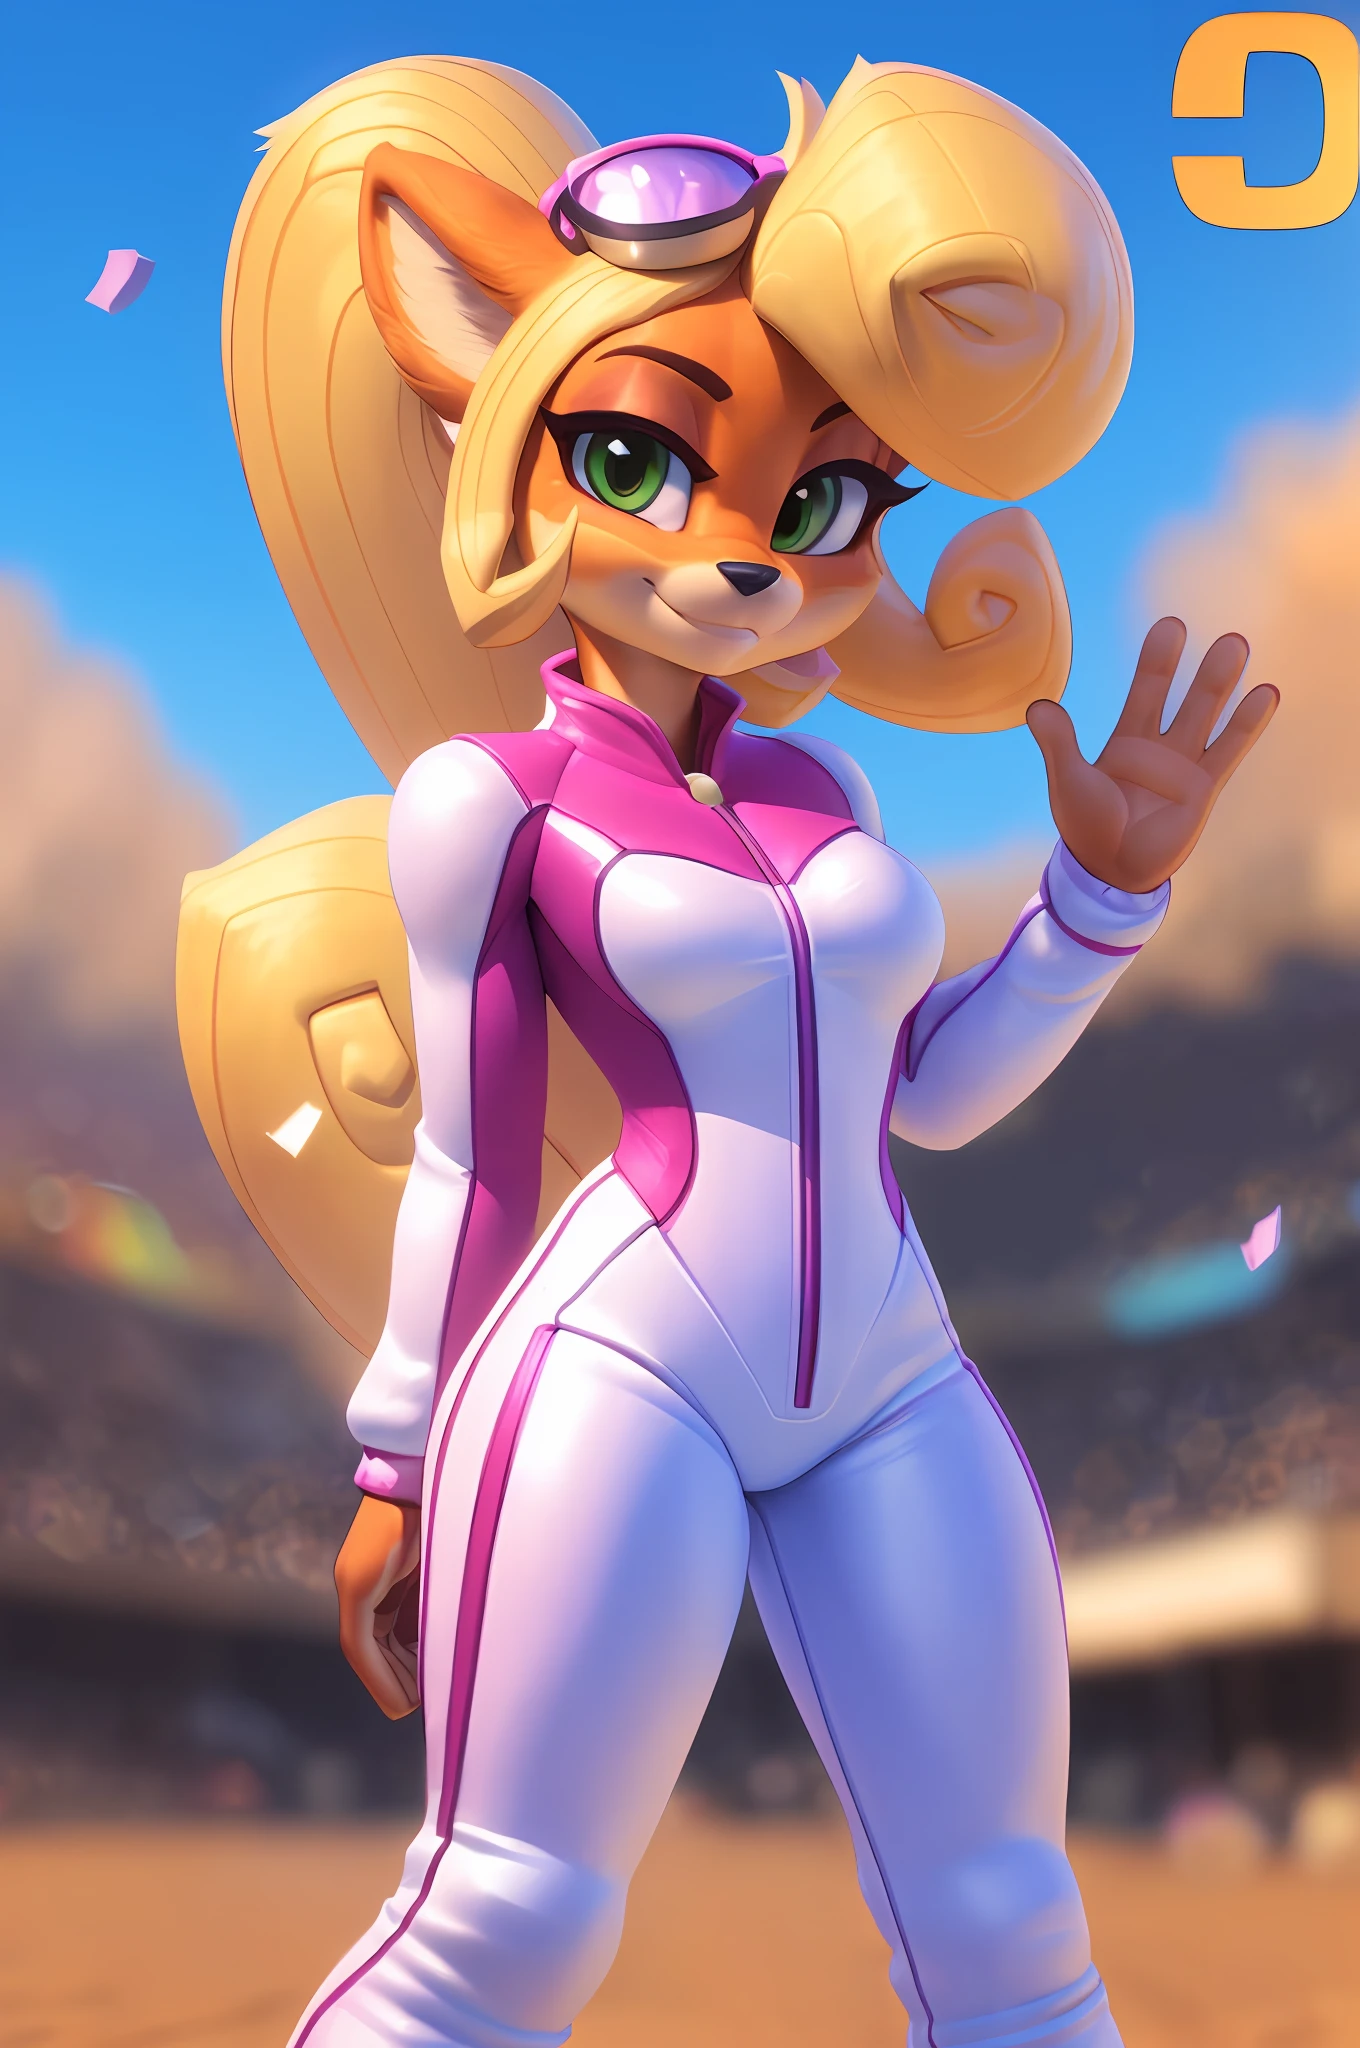 [Coco bandicoot], [Uploaded to e621.net; (Pixelsketcher), (wamudraws)], ((masterpiece)), ((solo portrait)), ((cowboy shot)), ((furry; anthro)), ((detailed fur)), ((raytracing)), ((detailed shading)), ((beautiful 3D art)), {anthro; (orange fur, black nose), cute green eyes, smug smirk, blonde hair, curly ponytail, curly bang, (pink and white race suit; blue lining, curvaceous hips), small , pink high tops), (shades on head)}, (standing; waving at camera), [background; raceway (pitstop, sun rays, confetti)]